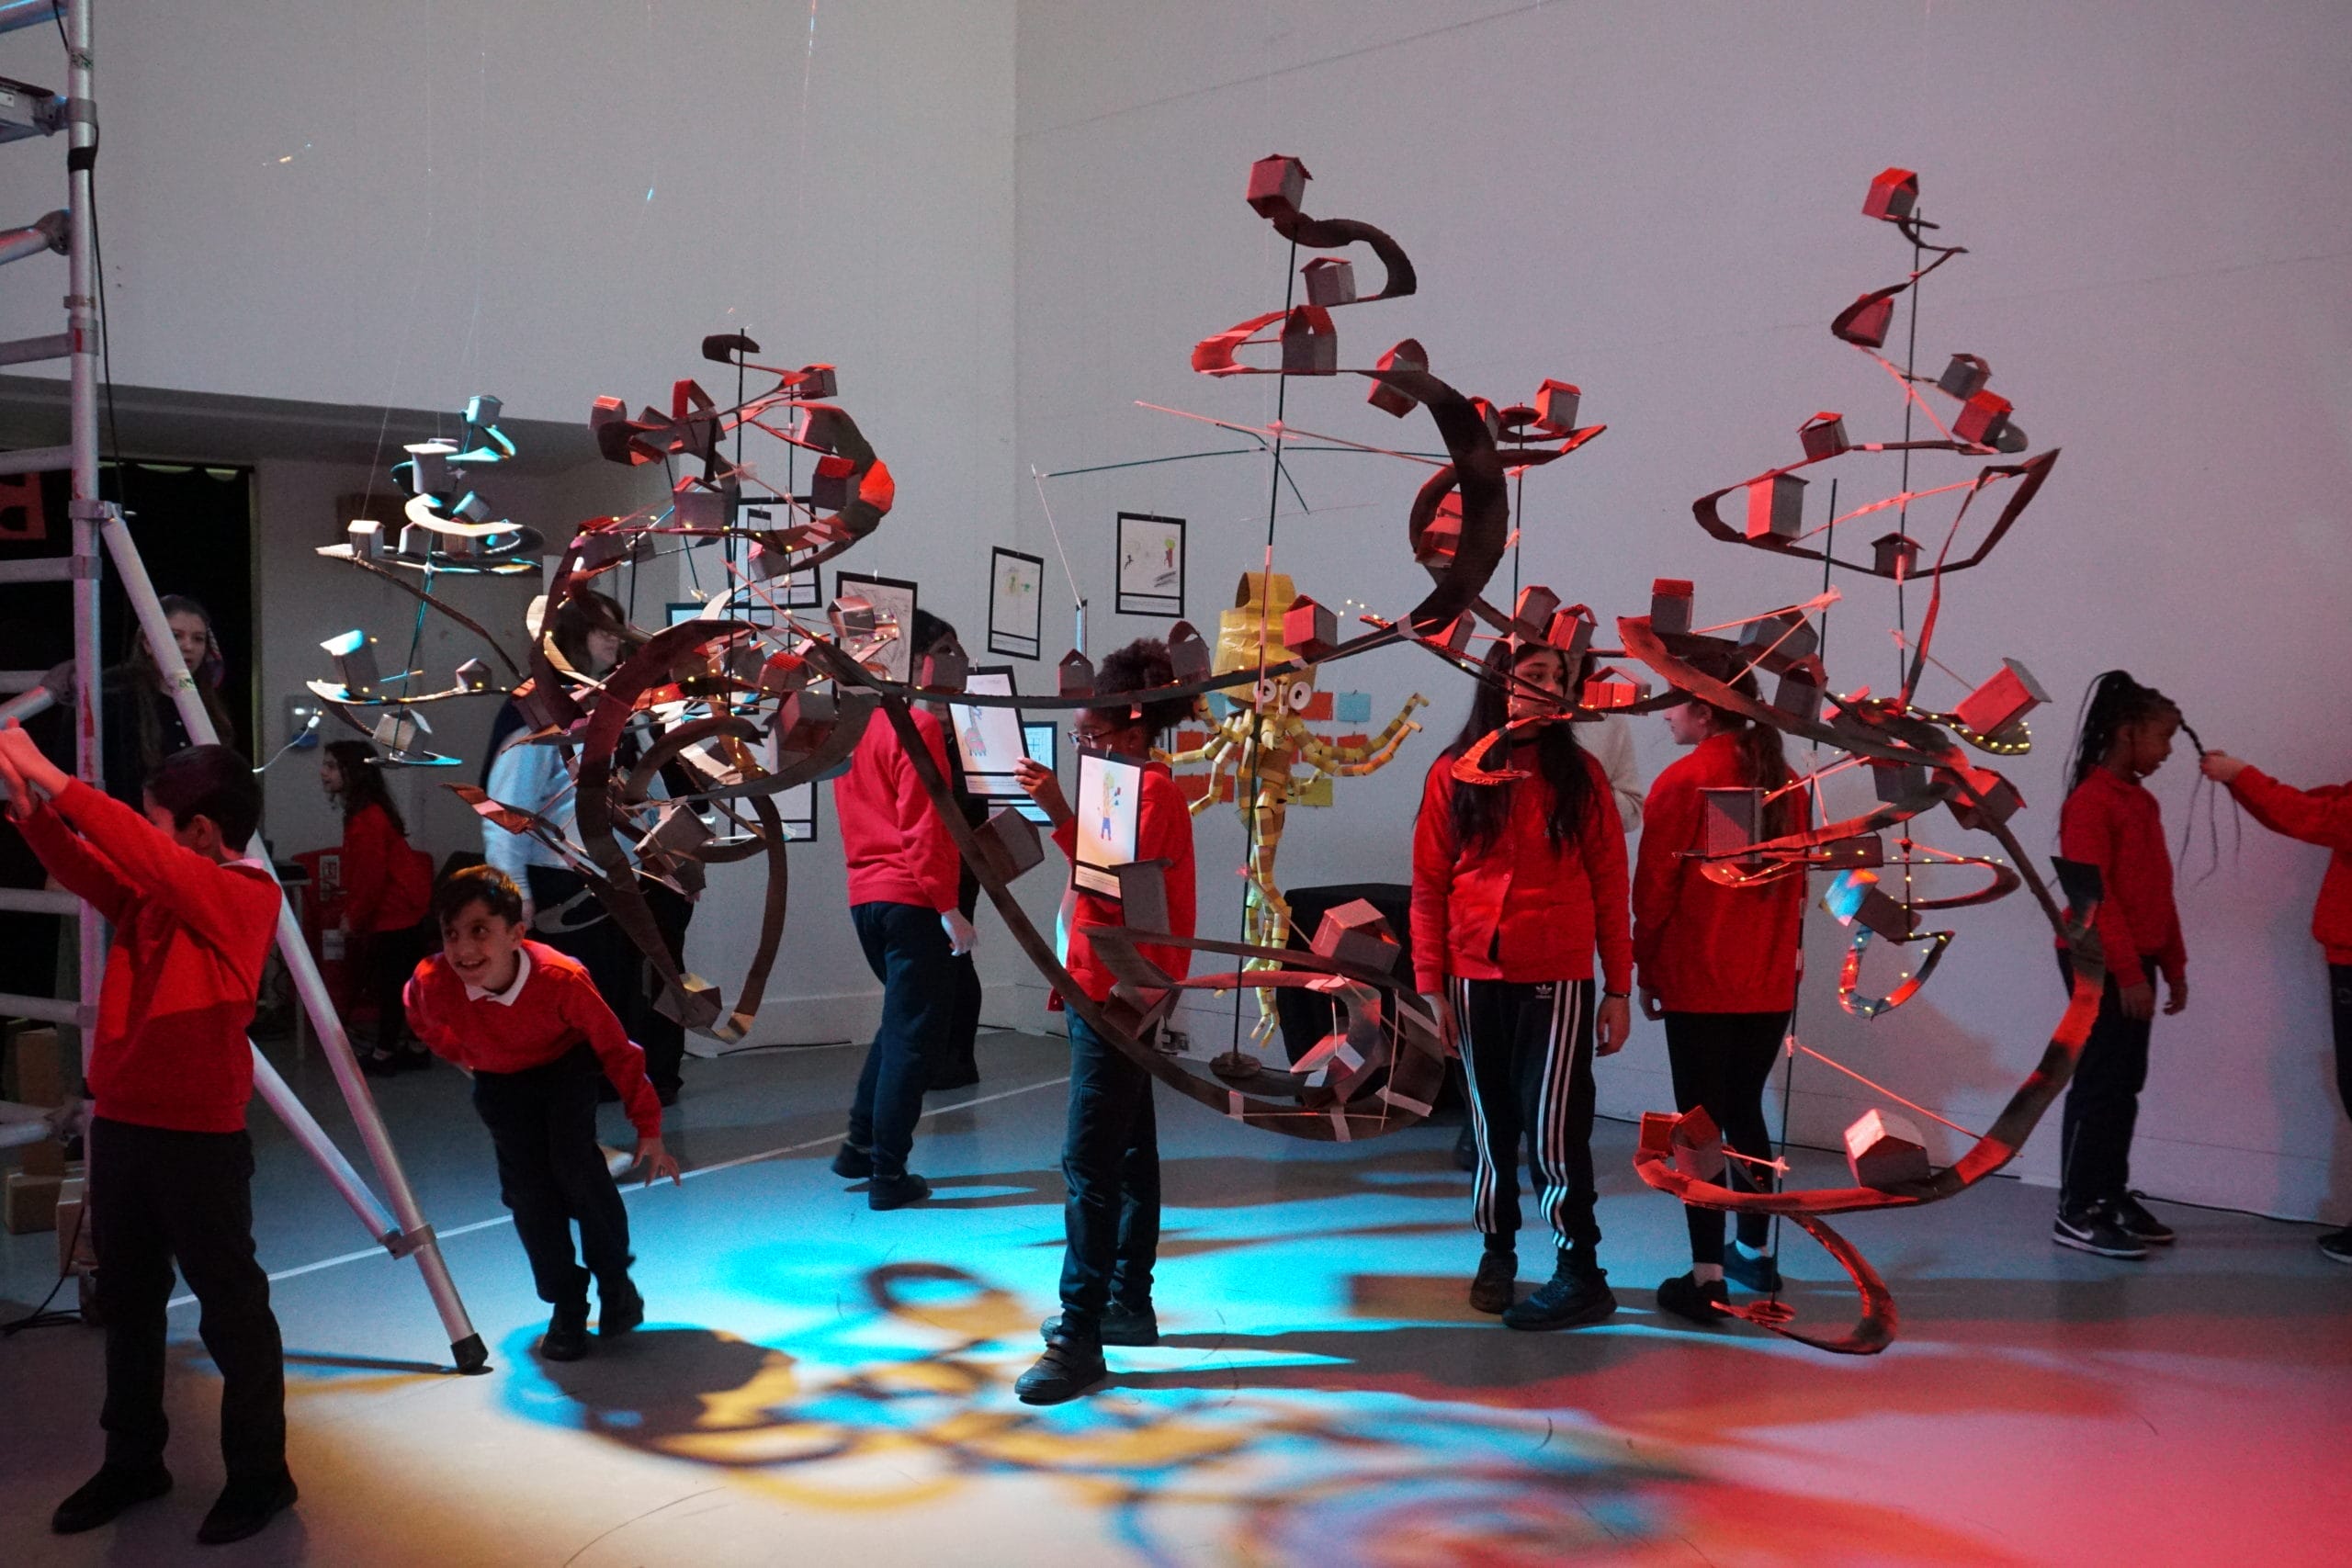 Wide shot of the exhibition space, where a futuristic world has been crafted out of cardboard and sustainable materials. Schoolchildren explore the exhibition, all wearing red uniform jumpers. Spiralling cardboard roads are hung from the ceilings with cardboard houses. The image is illuminated with atmospheric lights in blues, reds, yellows and purples.